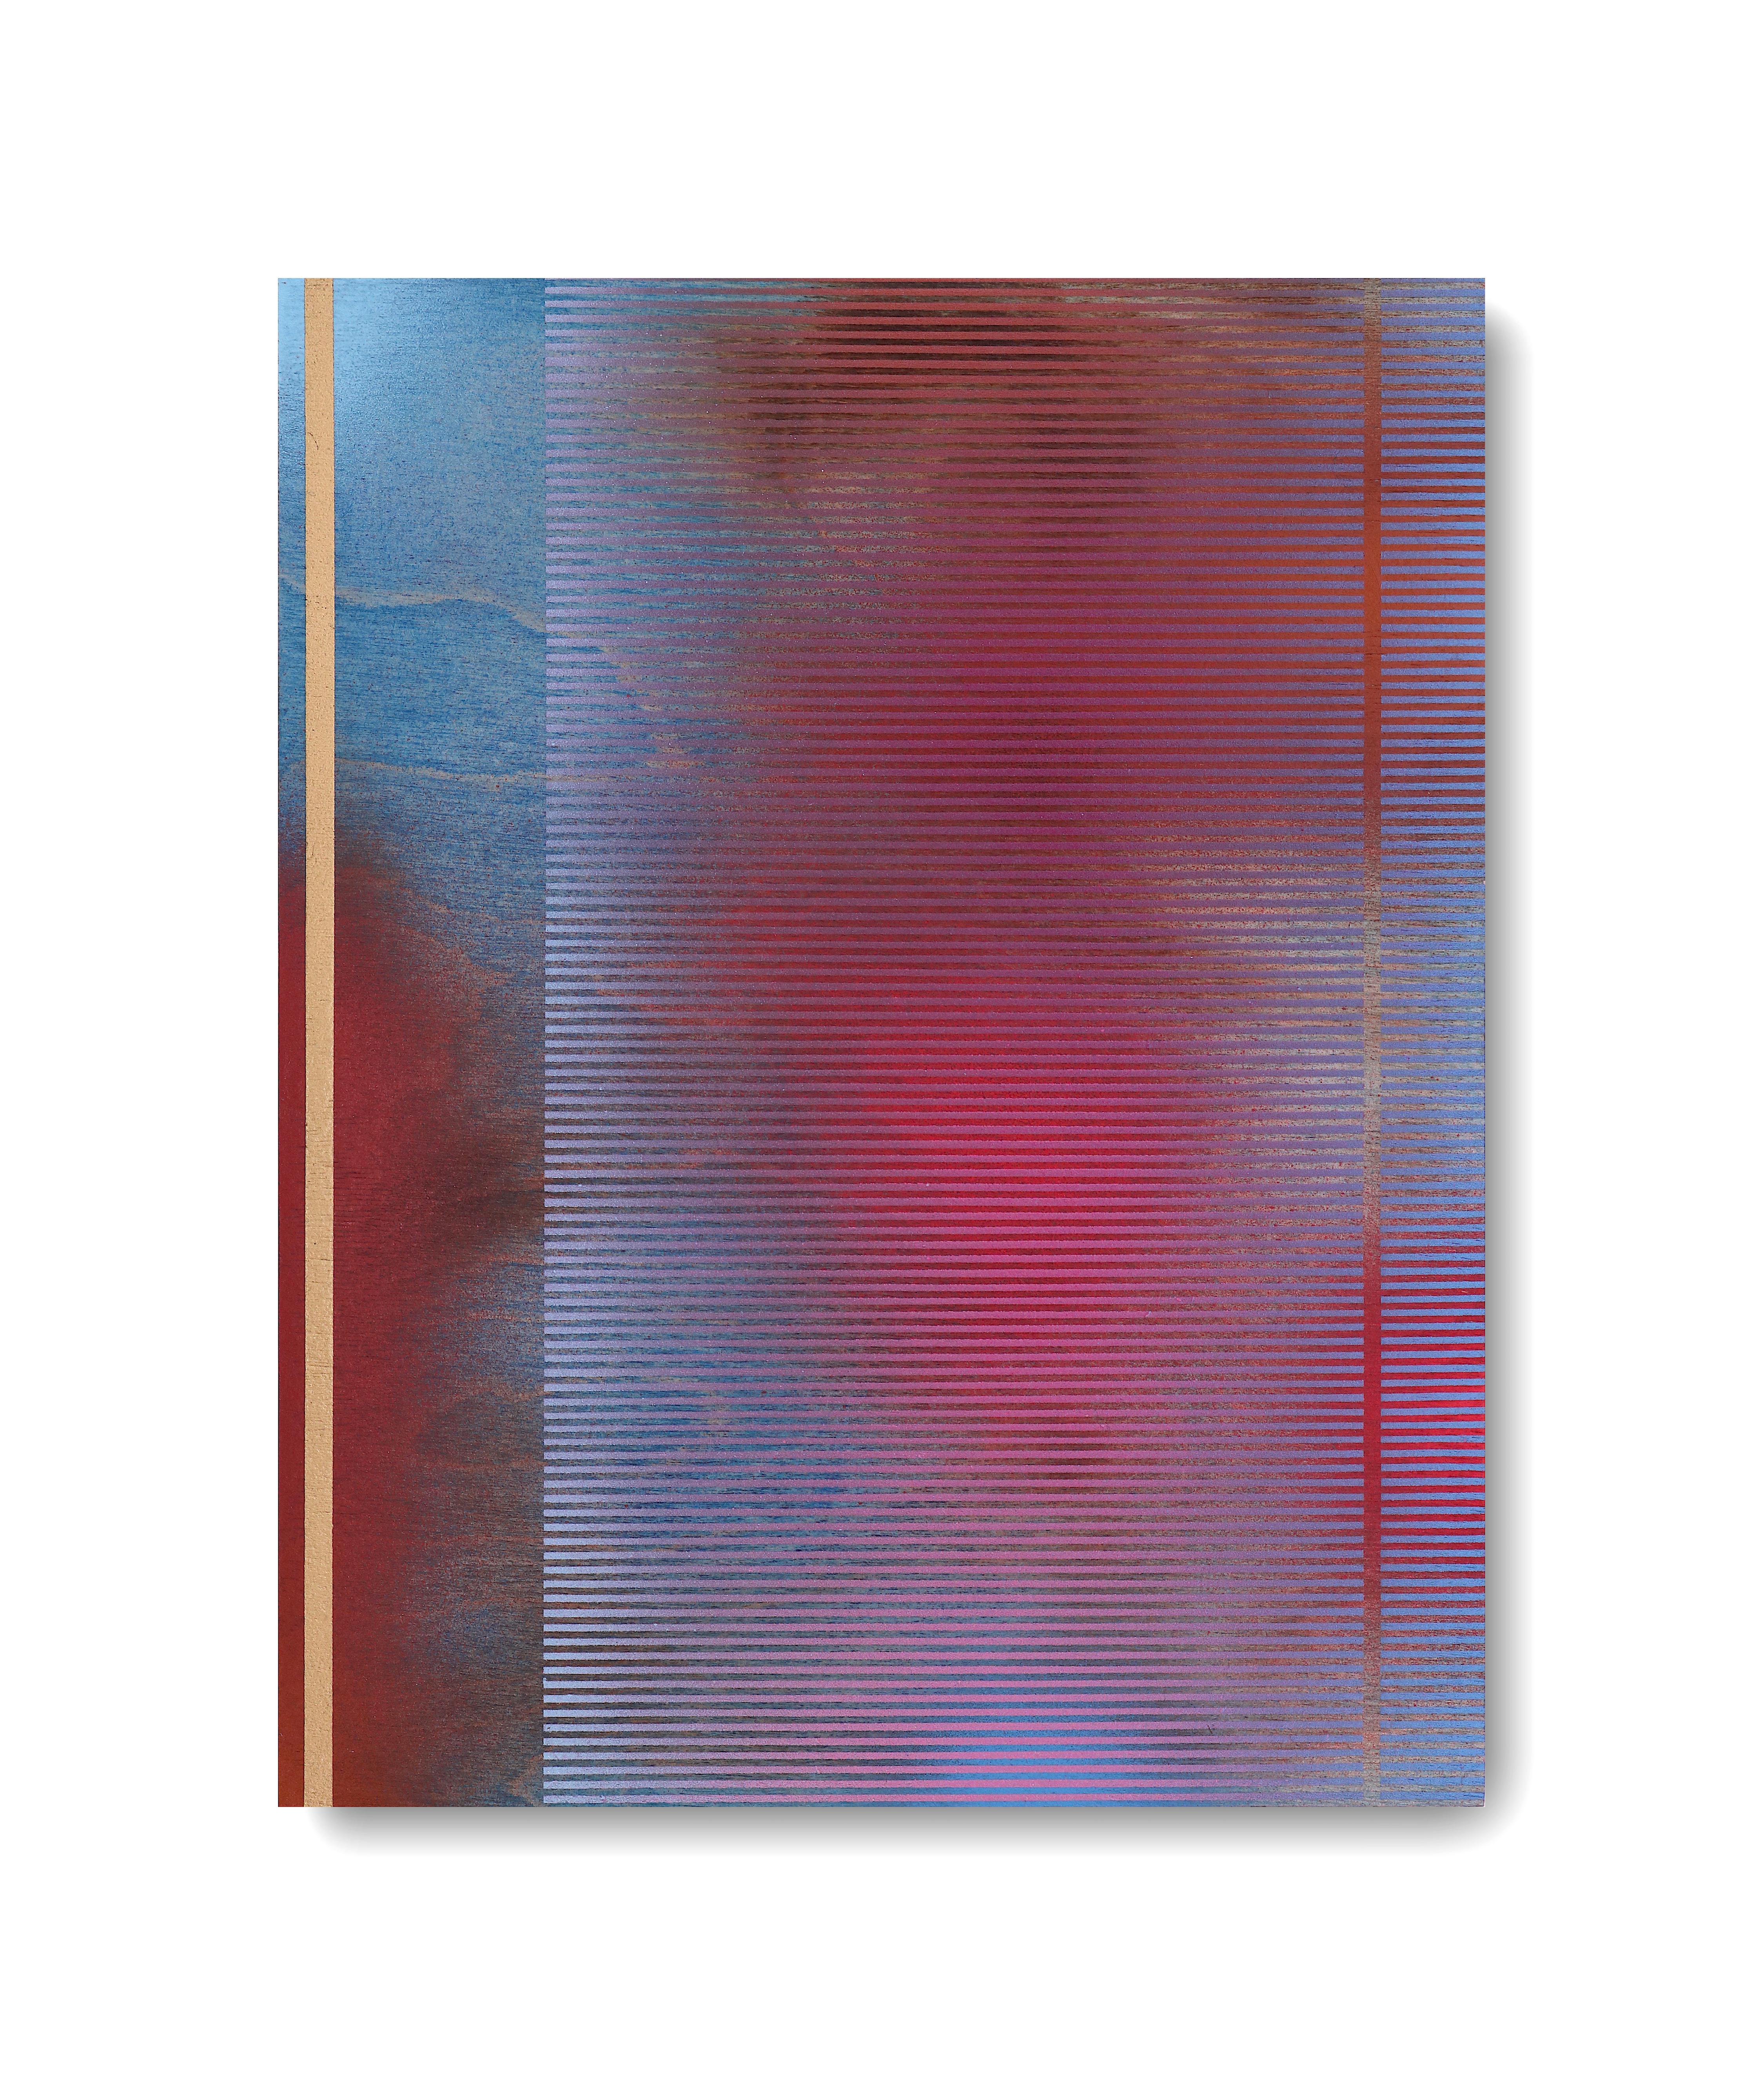 Mangata XVI (small scale grid spray painting abstract wood contemporary op art) - Mixed Media Art by Melisa Taylor Metzger